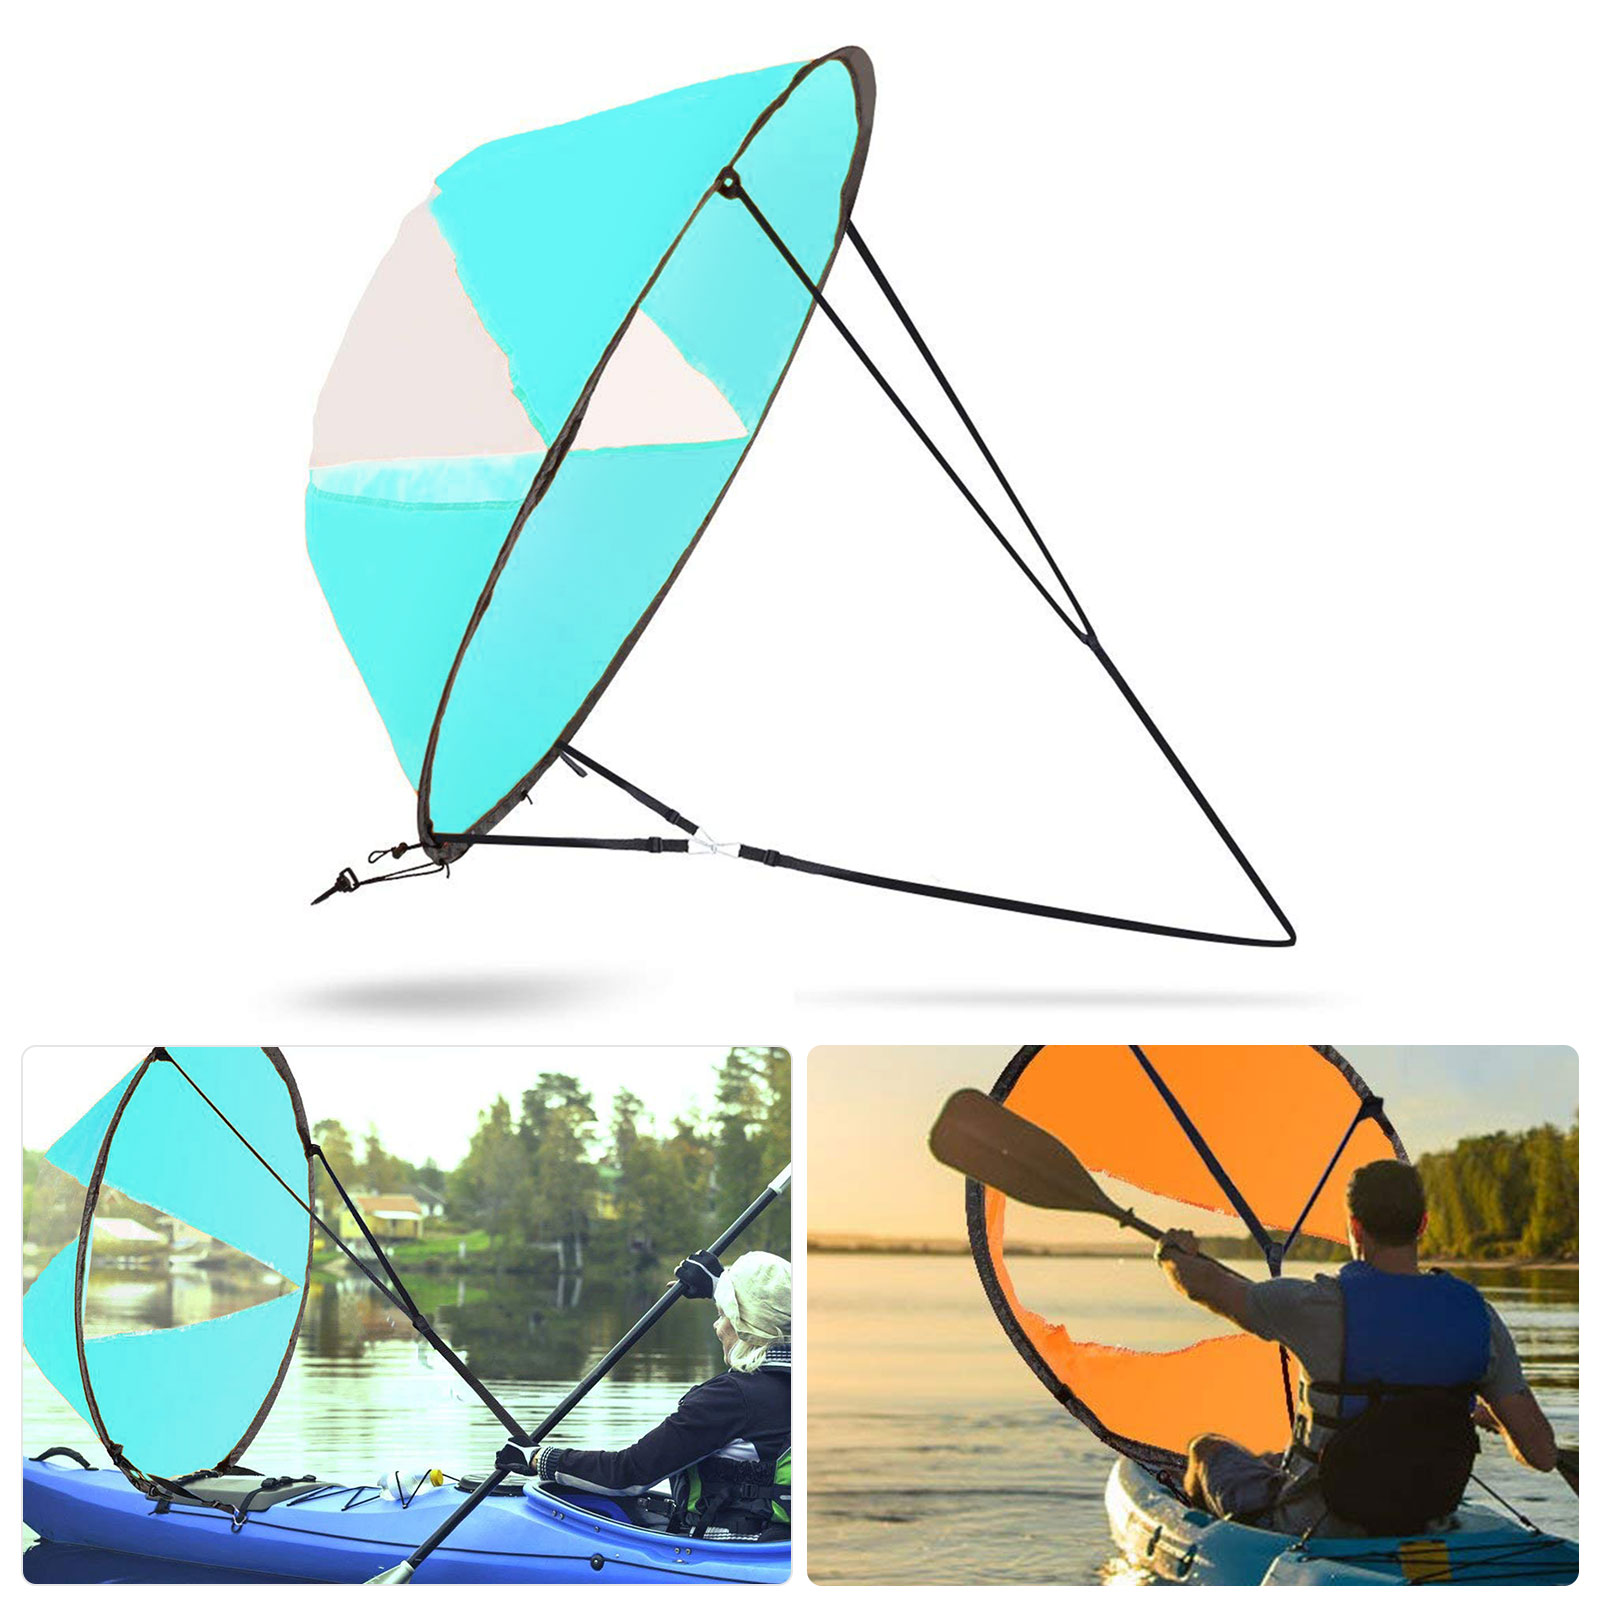 Details about   Kayak Boat Wind Sail Sup Paddle Board Sailing Canoe Rowing Boats Wind Window LOT 